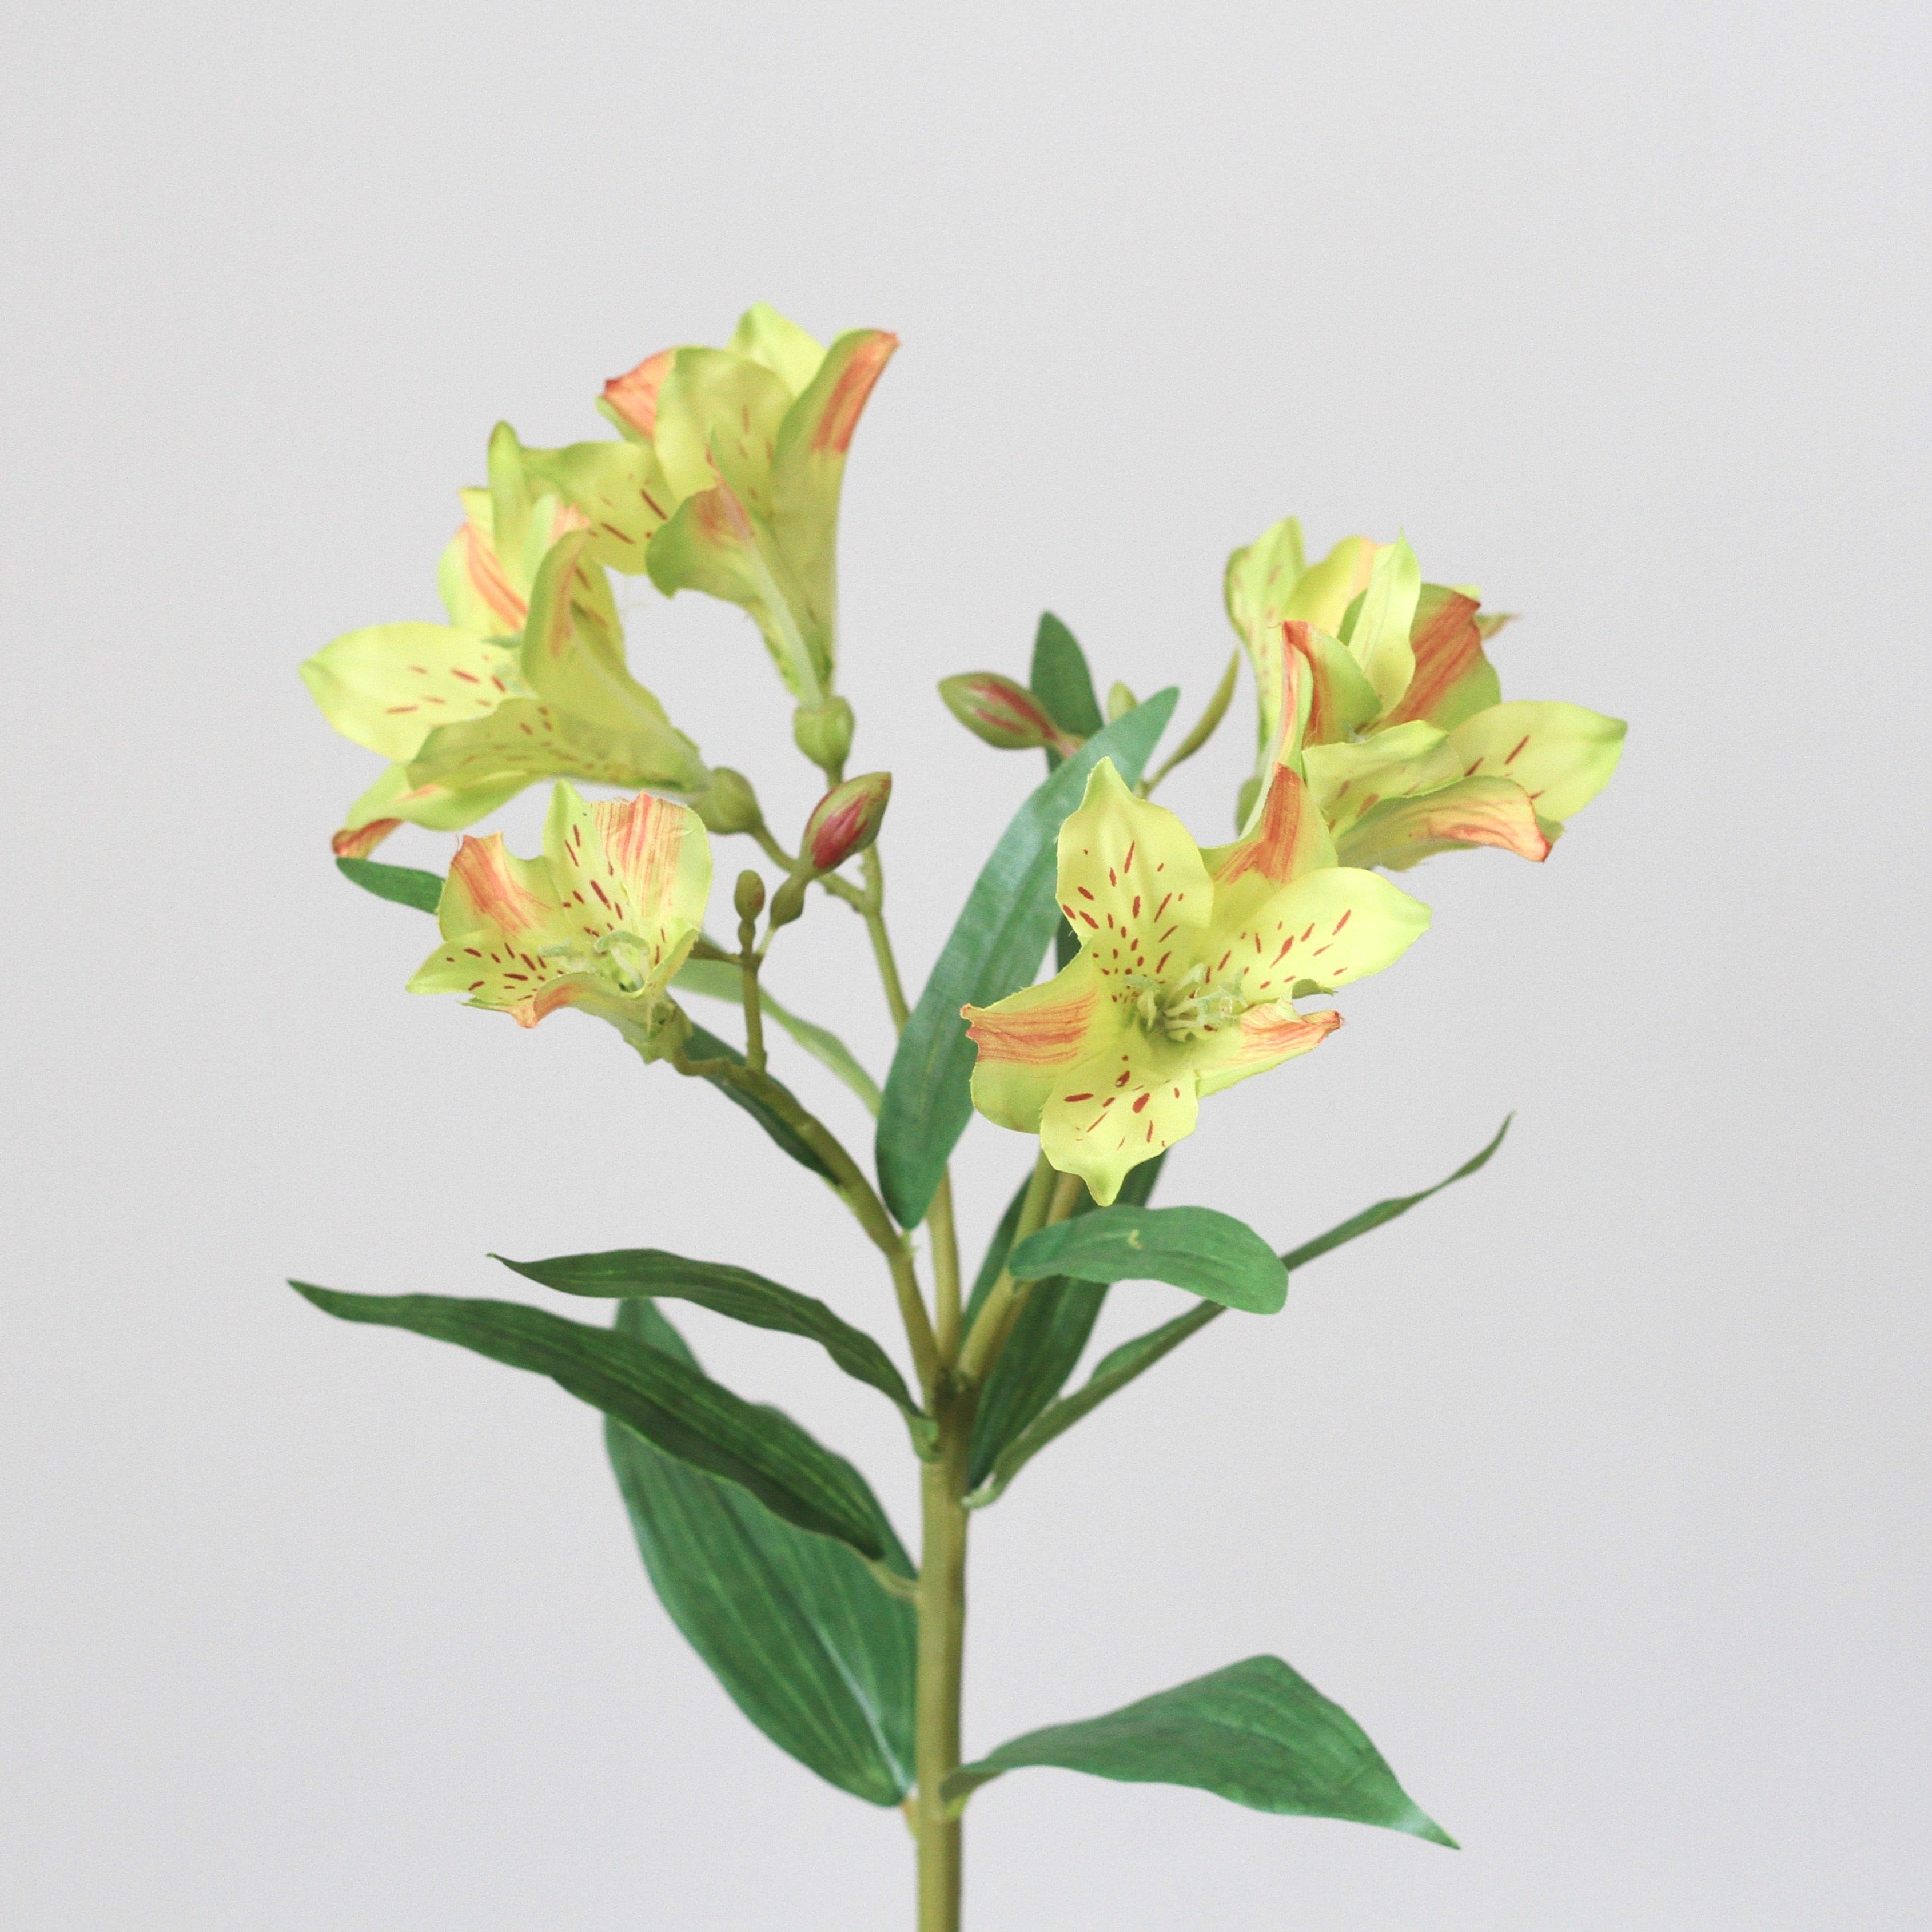 Artificial alstroemeria, the most luxury faux alstroemeria stems, realistic not fake silk astroemeria flowers to buy online from Amaranthine Blooms UK